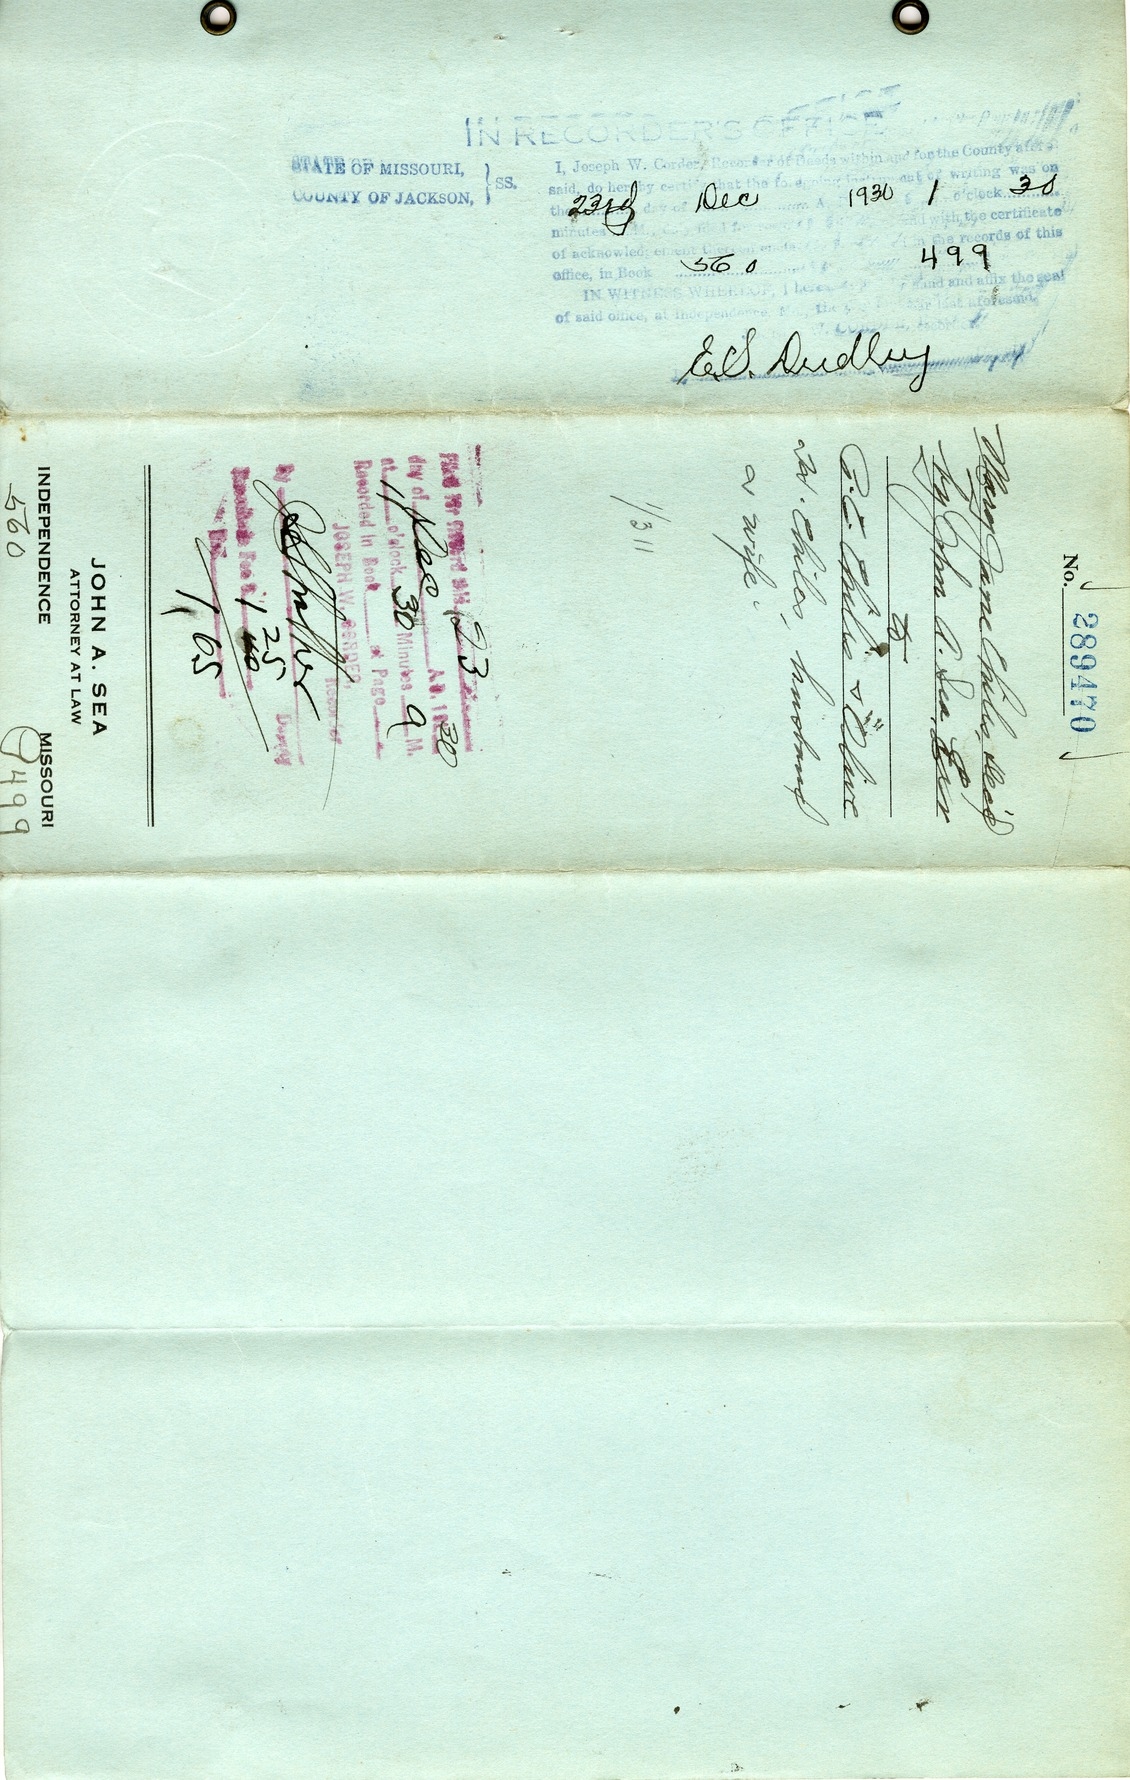 Executor's Deed of the Estate of Mary Jane Chiles to P. C. Chiles and Olive Chiles